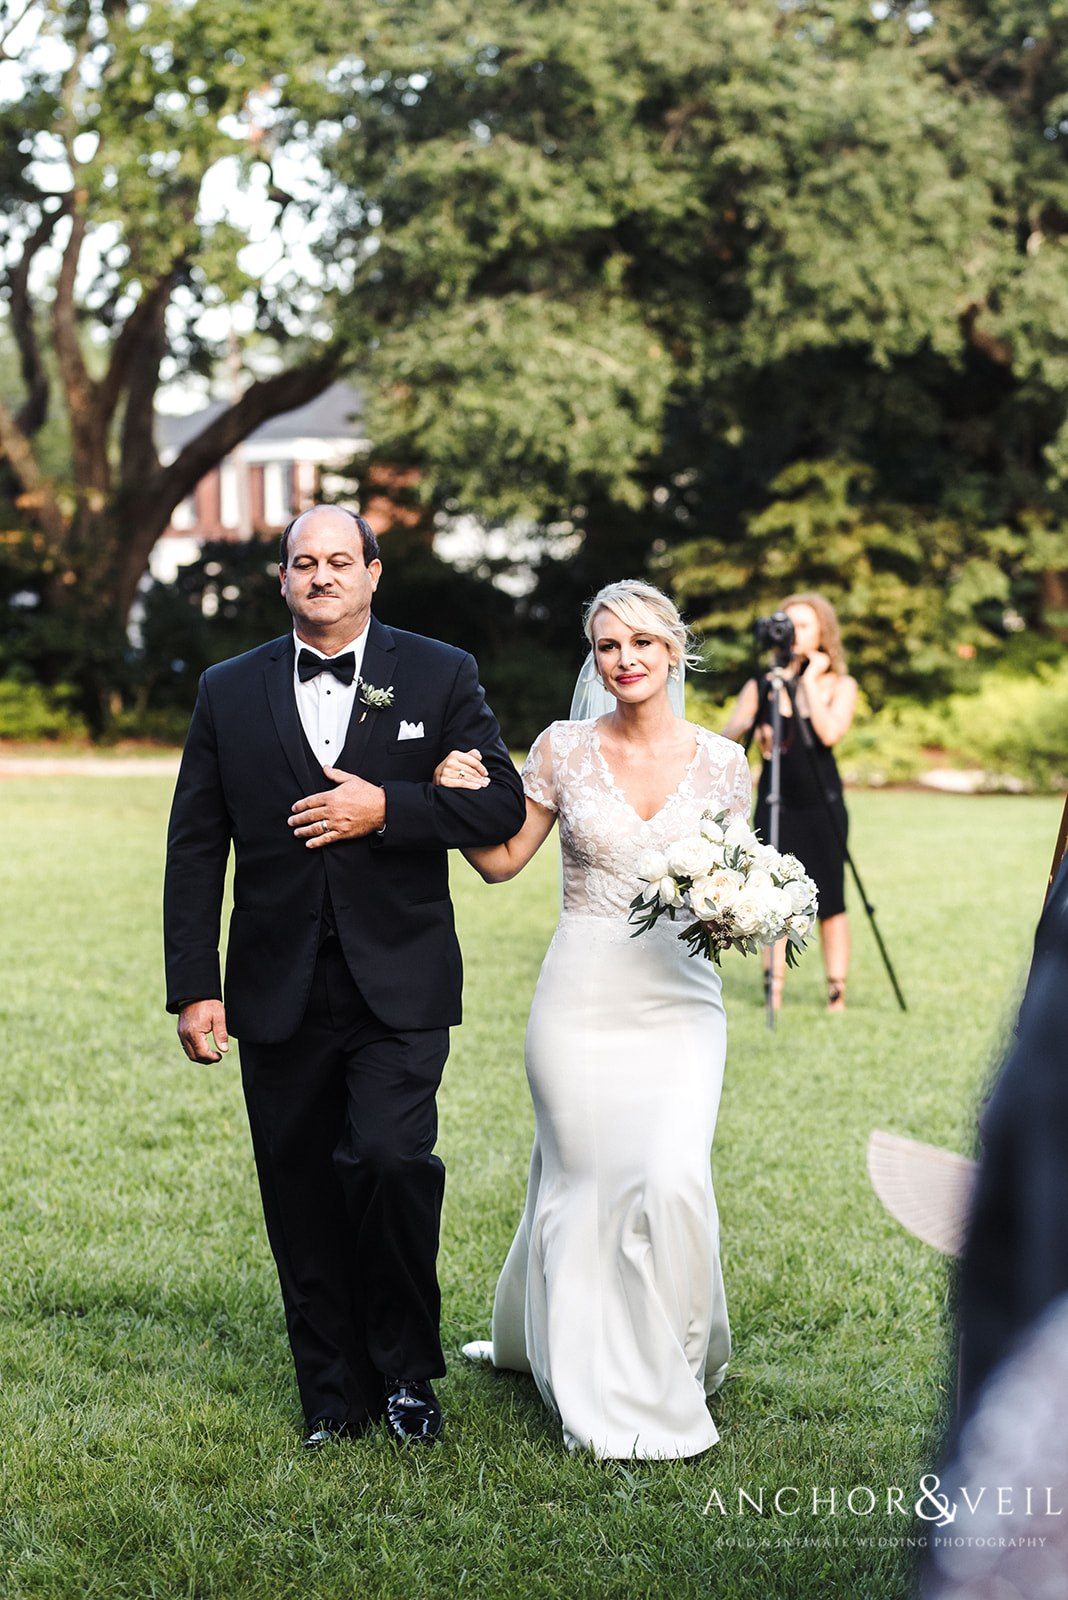 The bride walking down the isle at the Lowndes Grove Plantation Wedding